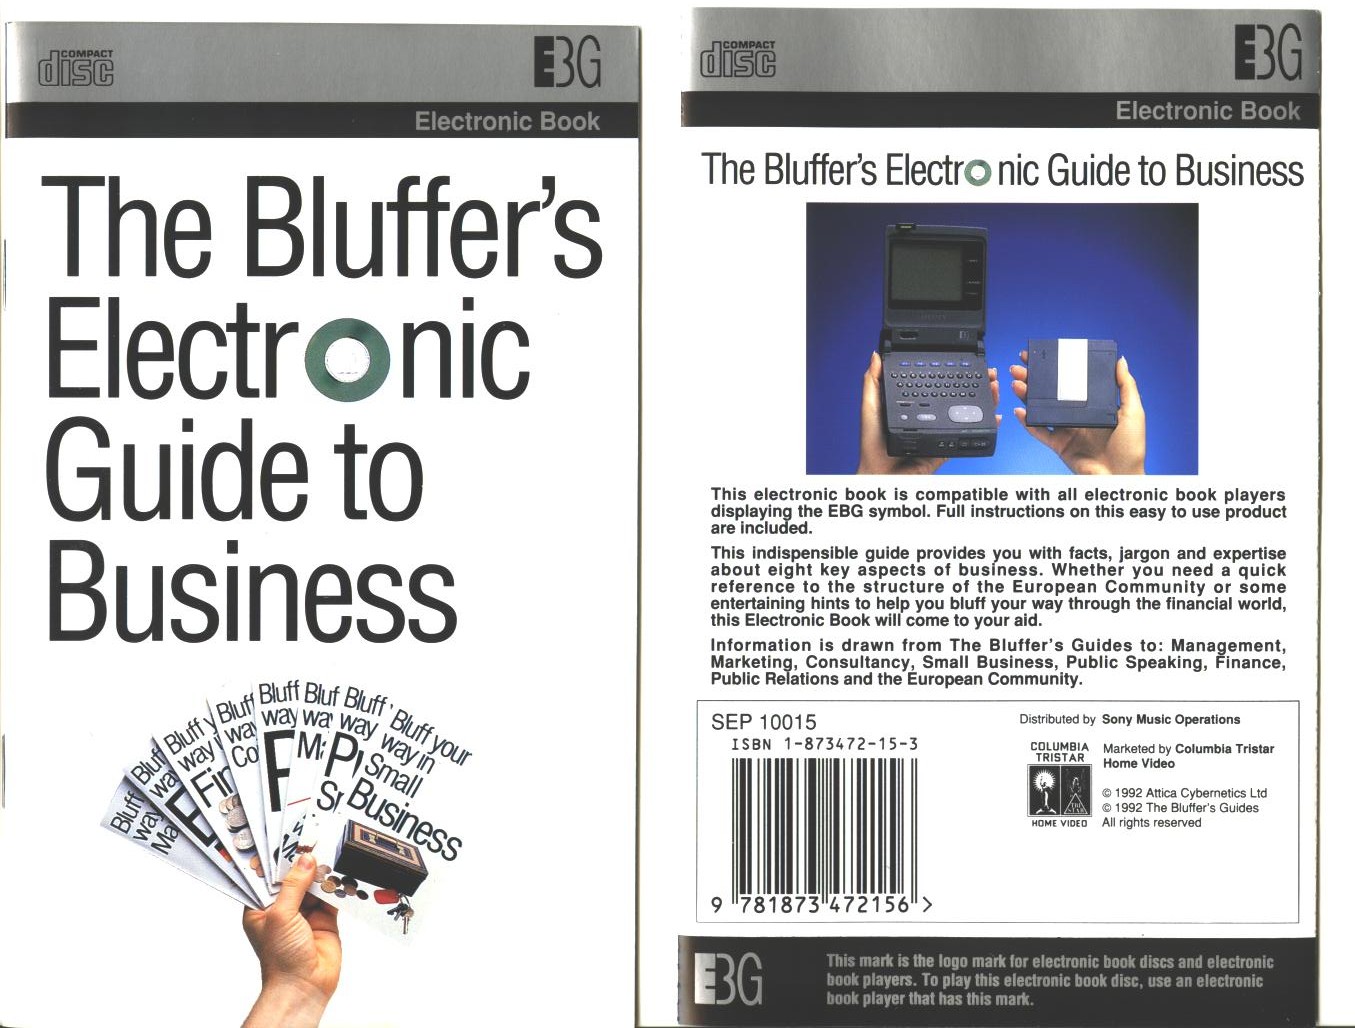 [The+Bluffer's+Electronic+1992.jpg]